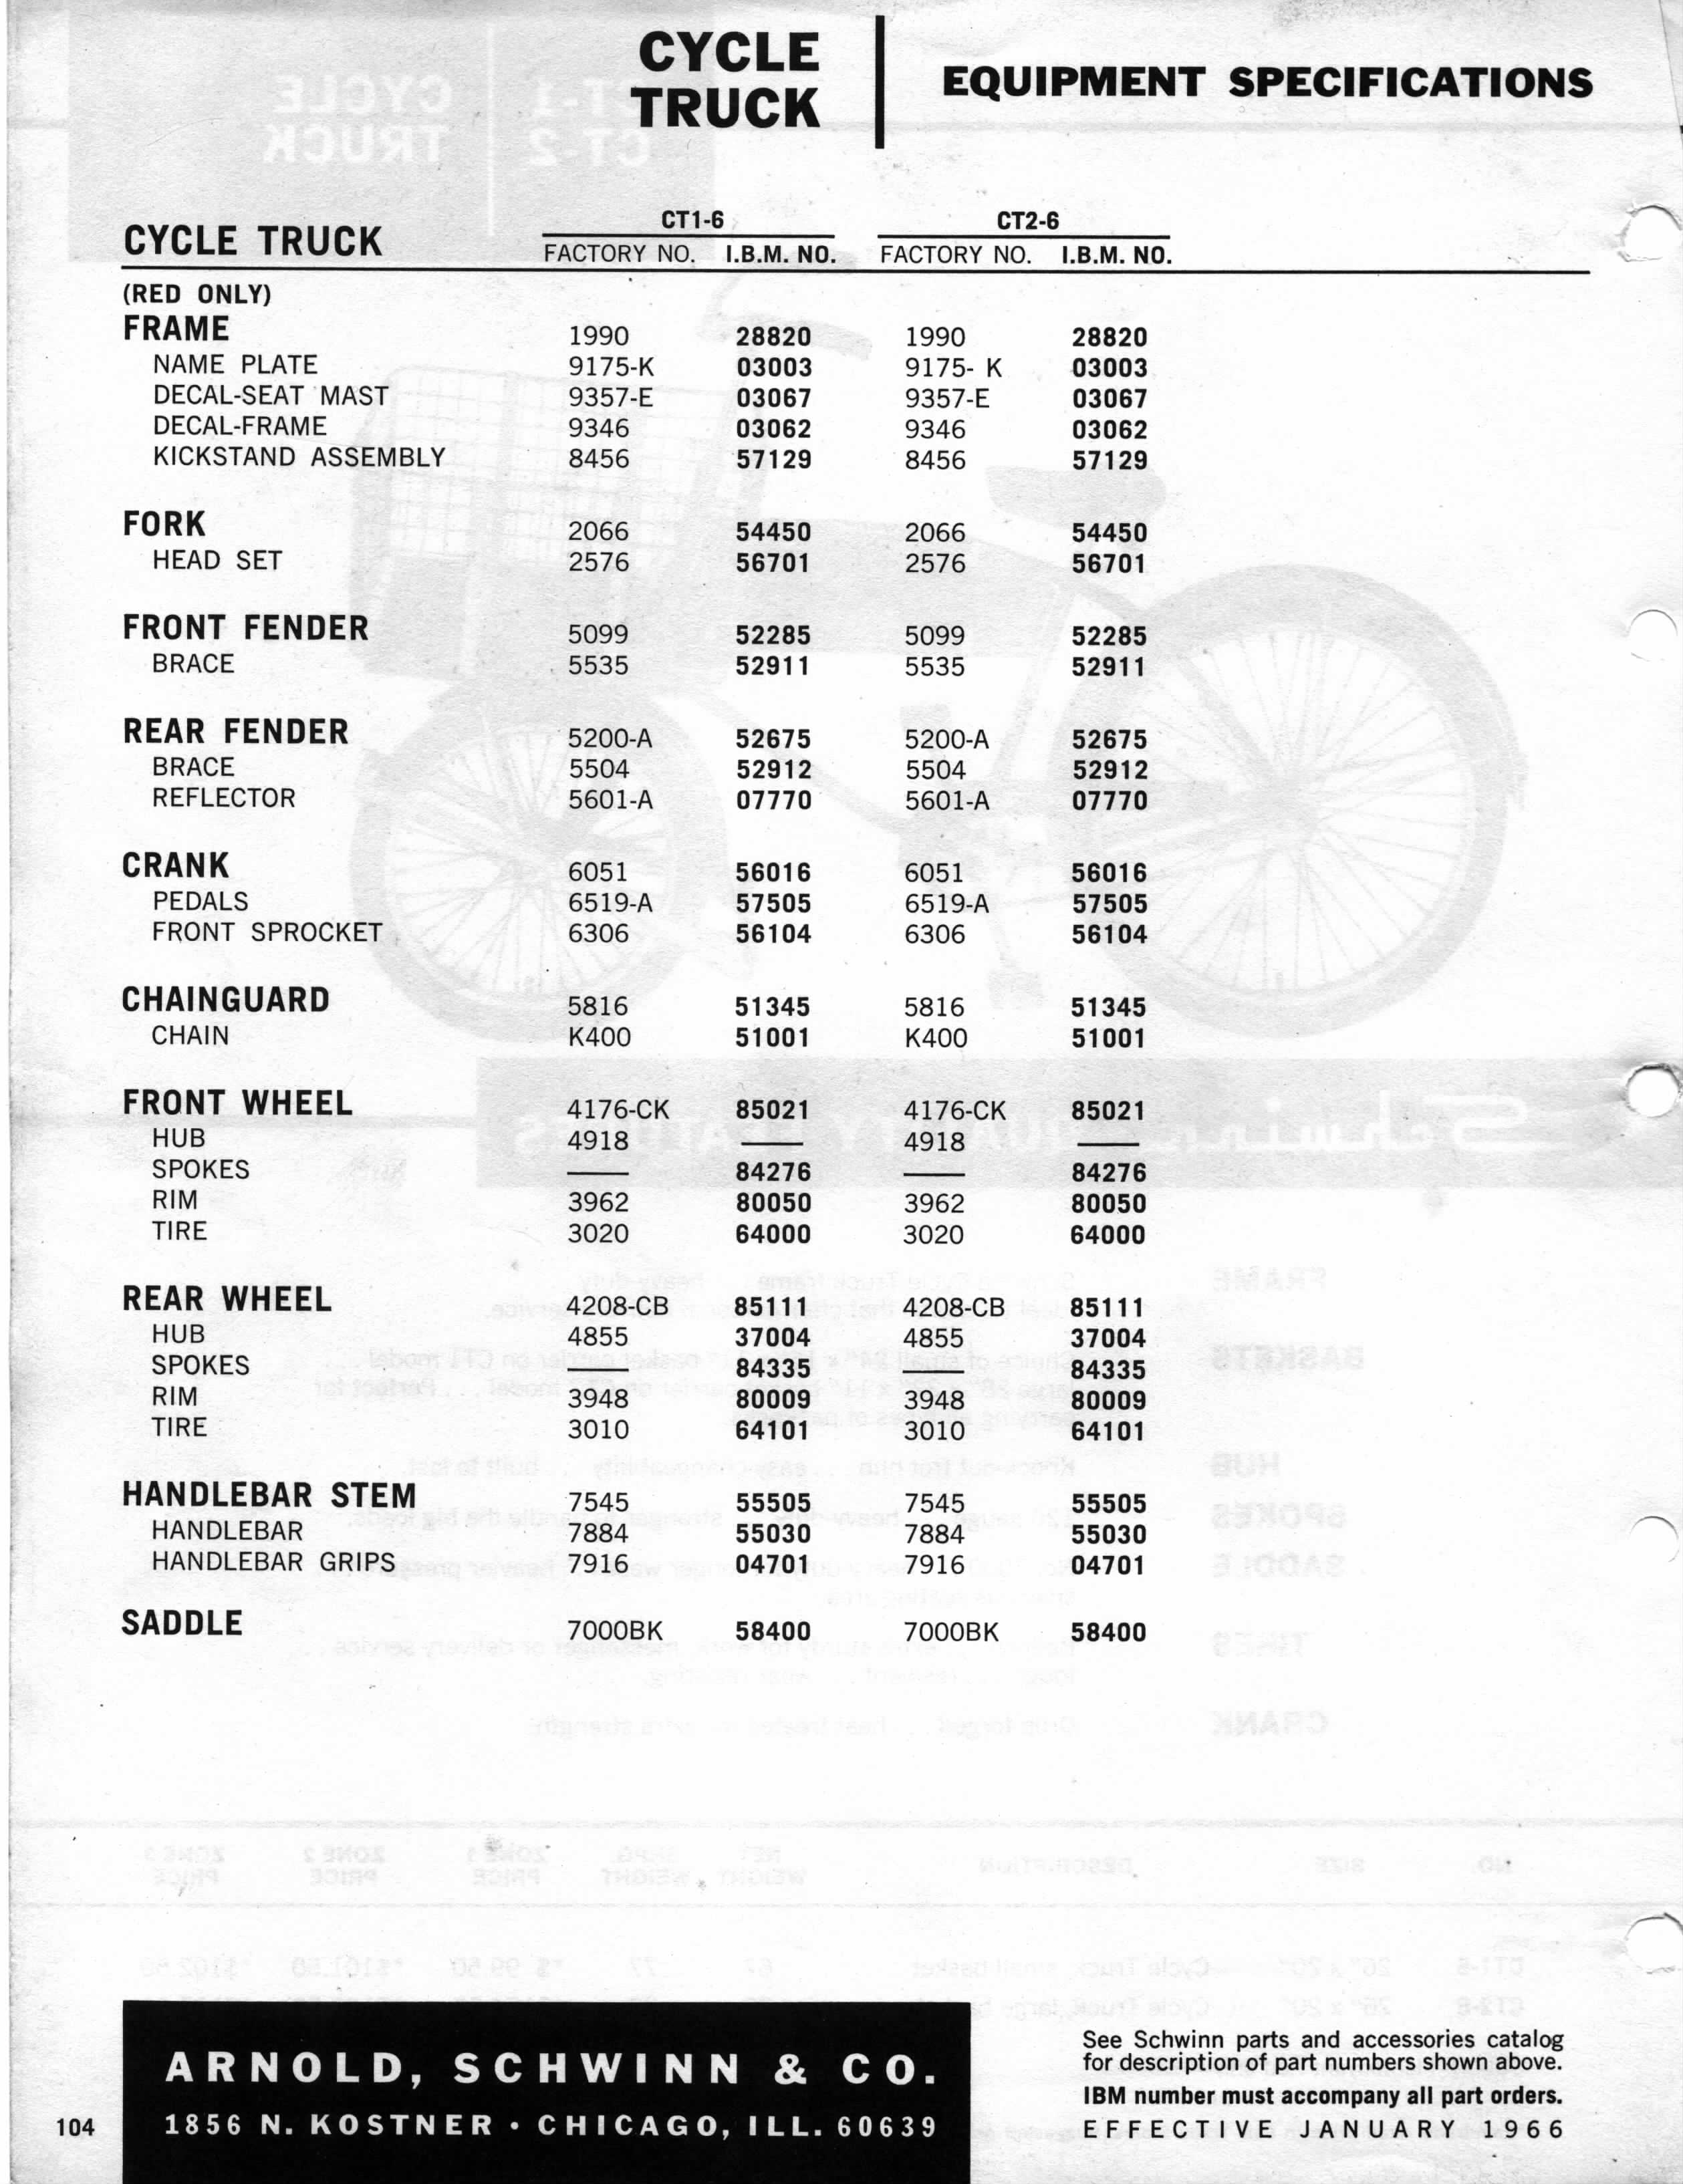 1966dlr_Cycle_Truck_Specs